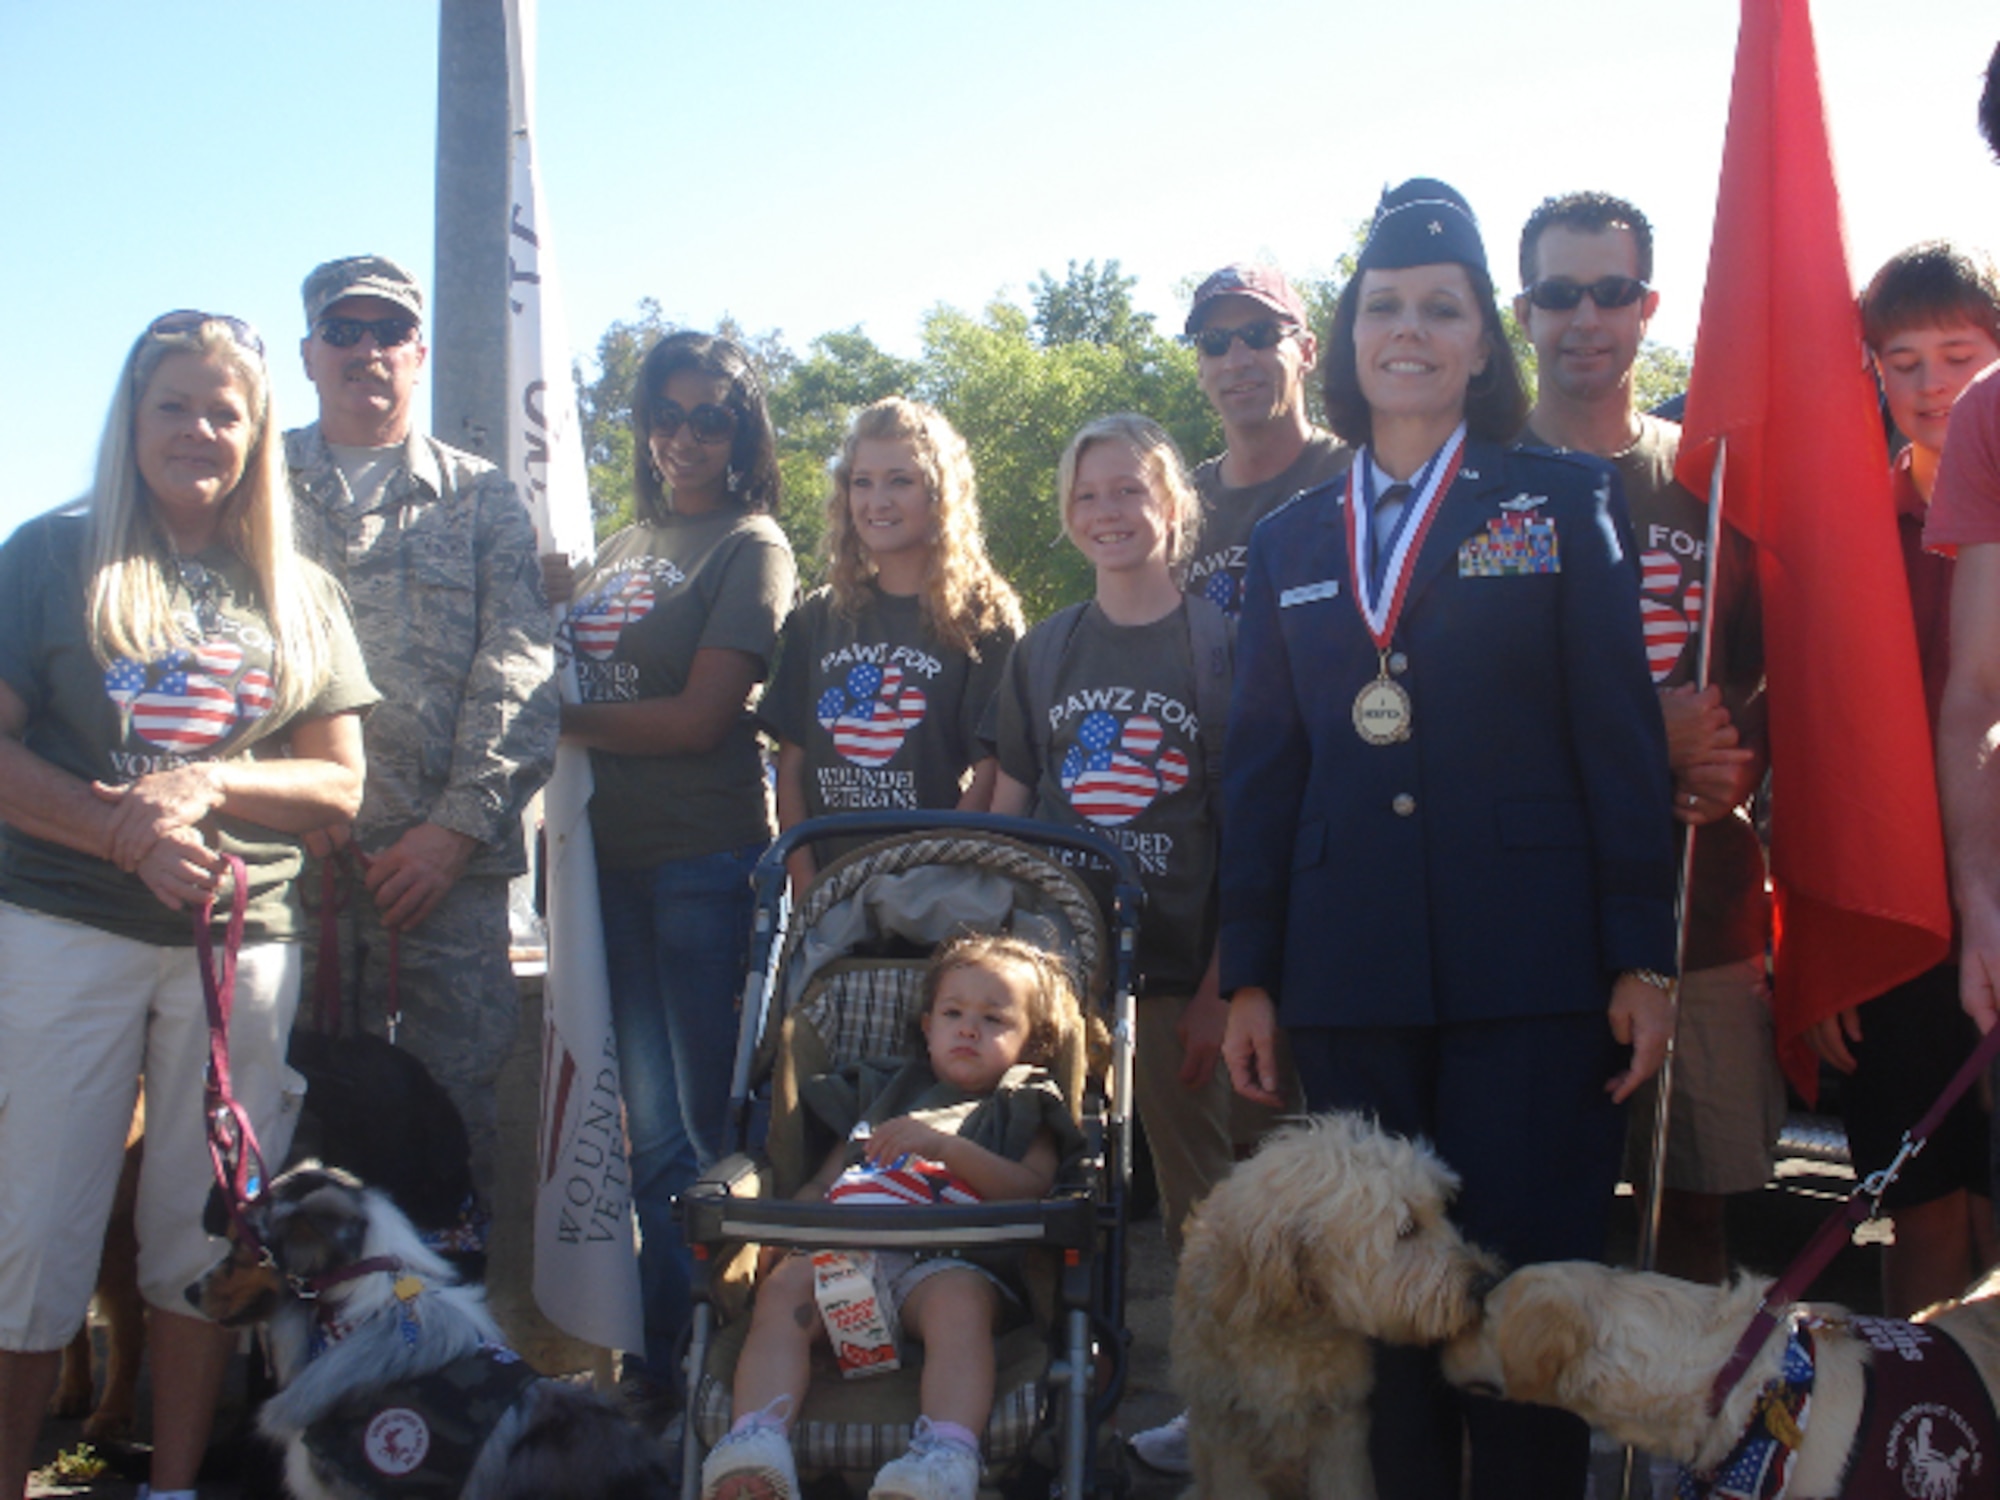 Brig. Gen. Pamela Milligan, Vice-Commander, 4th Air Force, Air Force Reserve Command, March Air Reserve Base, Calif., poses with members of "Pawz for Wounded Veterans," at the 6th annual "Salute to Veterans Parade" in downtown Riverside, Calif., April 16, 2011.  "Paws for Wounded Veterans" is an organization that provides service dogs free of charge to those who have been wounded during military service and require the help of an assistance dog.  General Milligan was a member of the reviewing party during the 132-unit parade, which was themed "Honoring Those Who Have Sacrificed" and featured participants from military units from across southern California. 